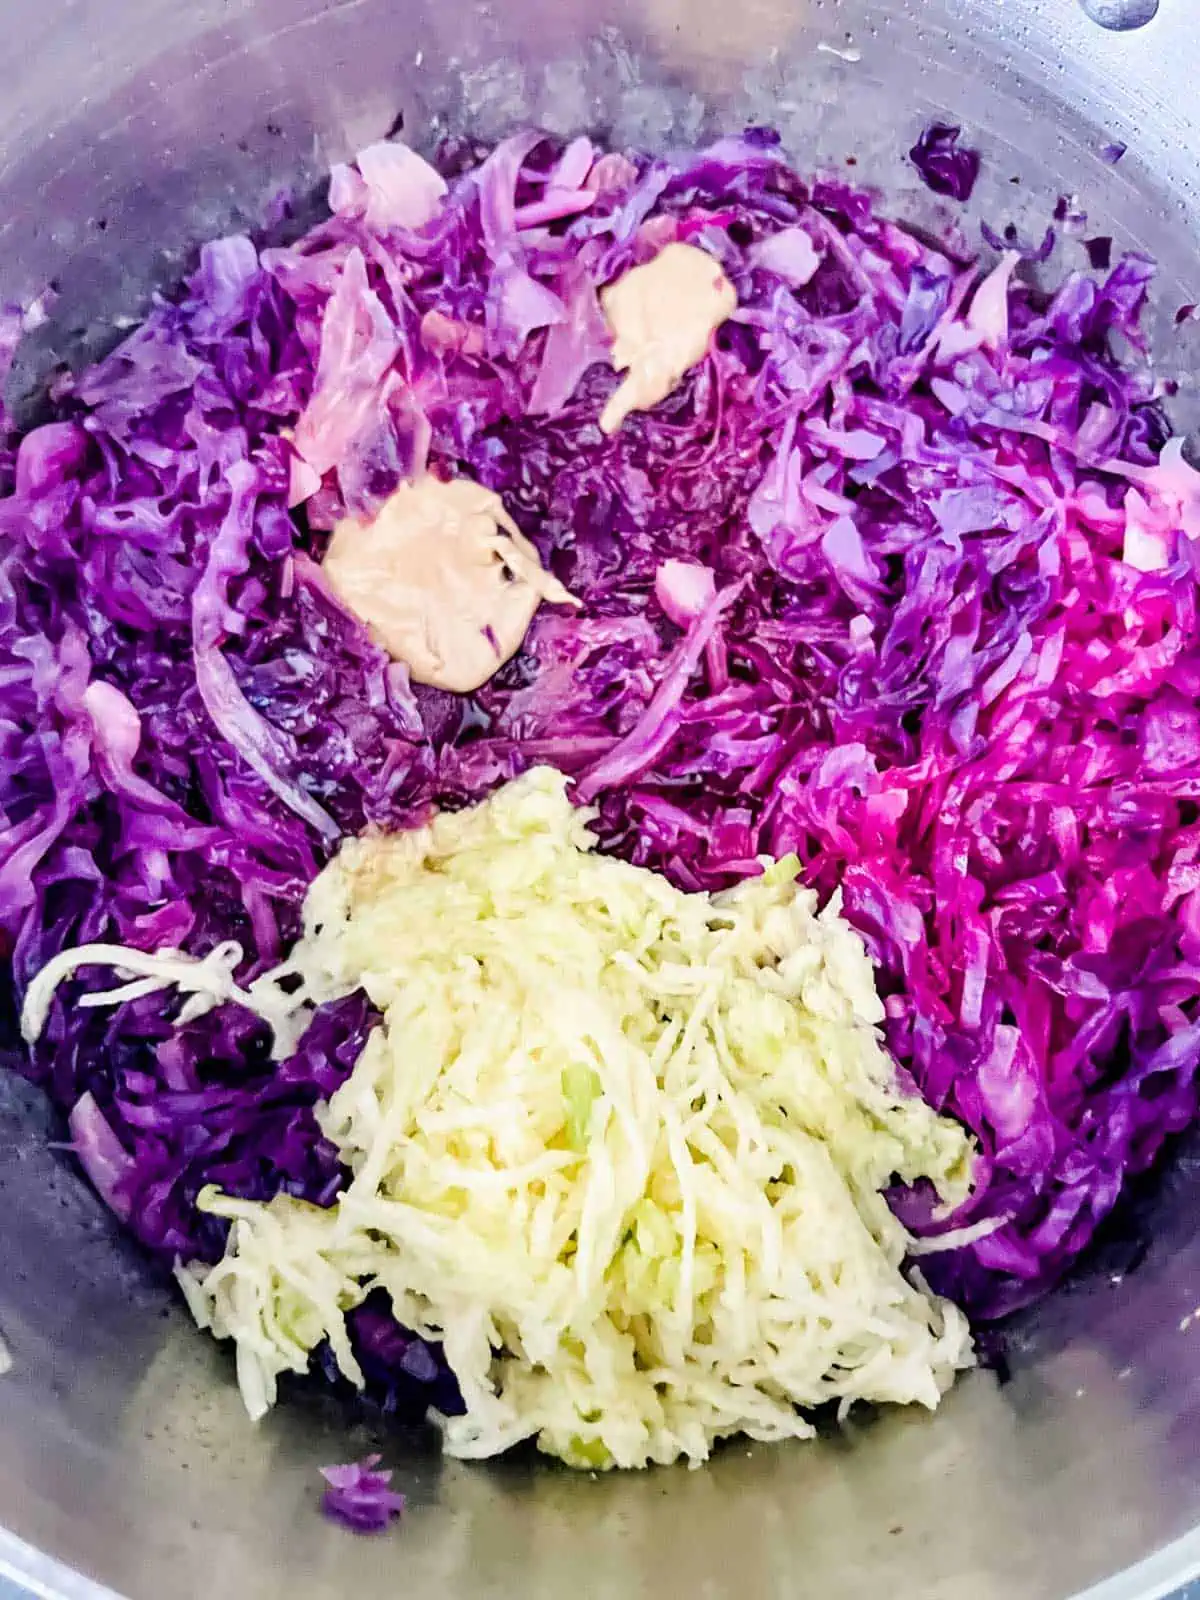 Photo of shredded apple being added to braised red cabbage.